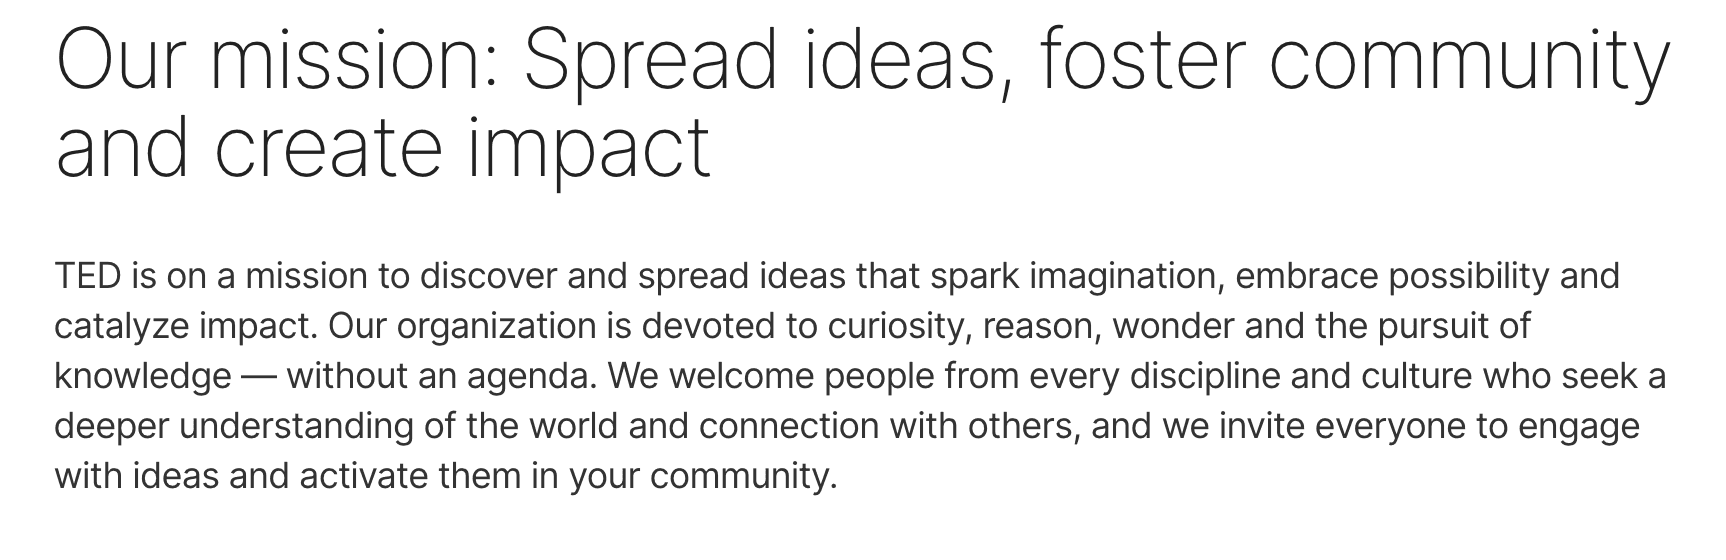 Our mission: Spread ideas, foster community and create impact